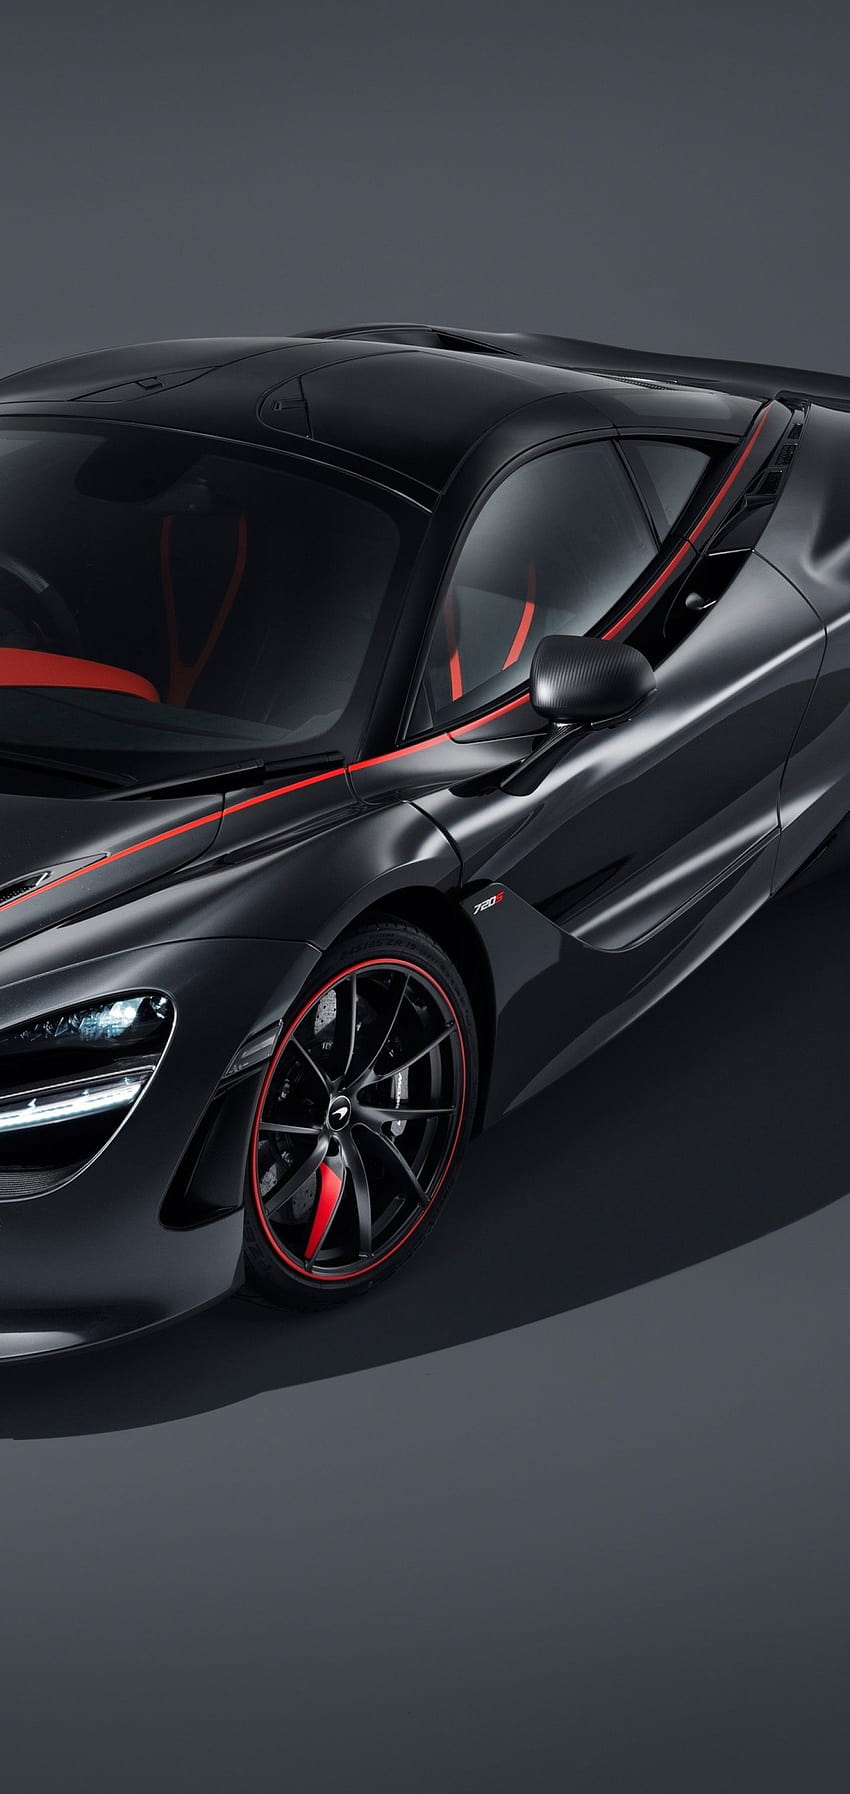 1440x3040 Mclaren 720s Stealth, Black And Red Concept, Supercars for Samsung Galaxy S10 Plus, stealth red HD phone wallpaper